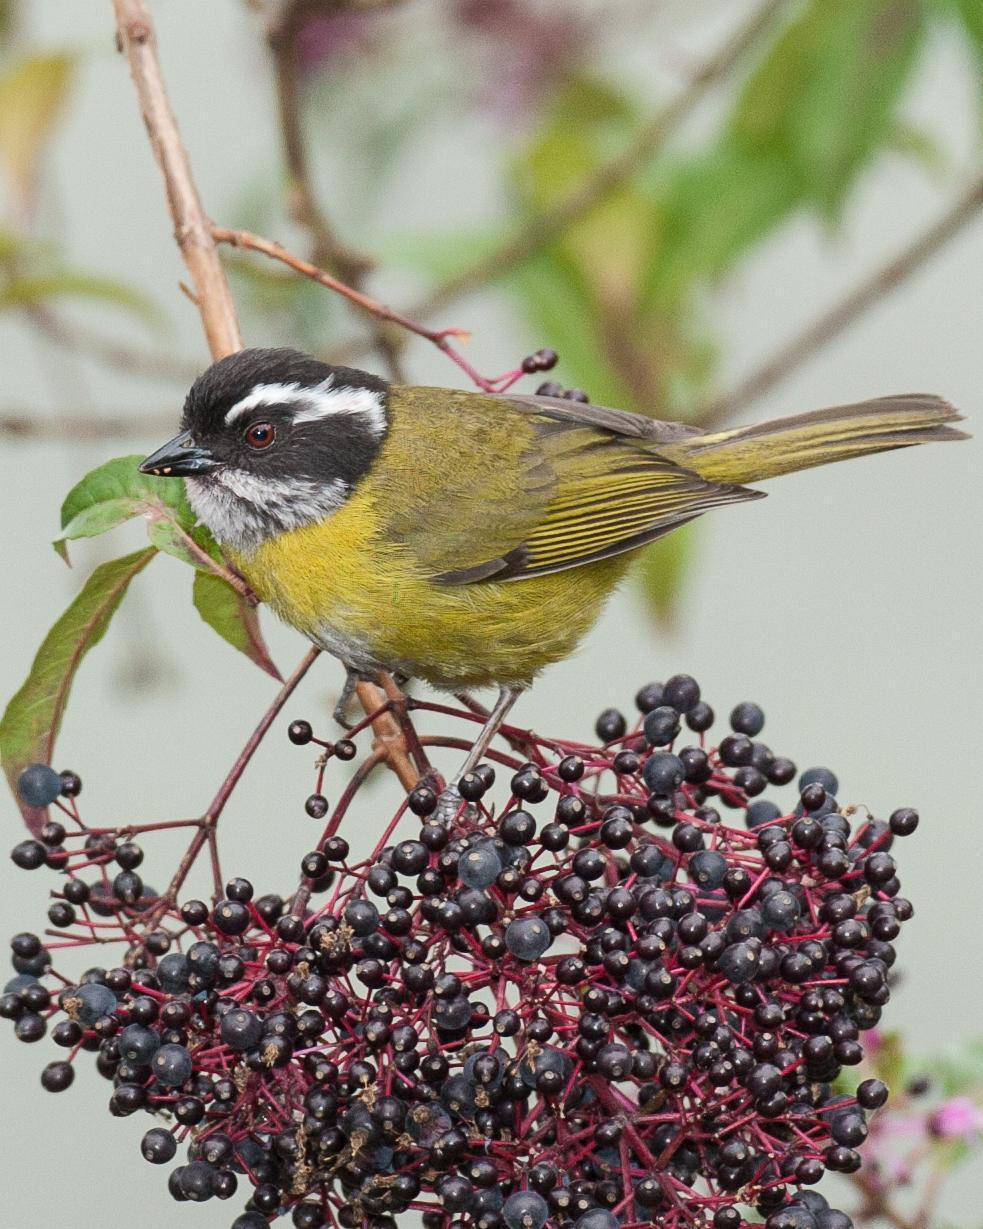 Sooty-capped Chlorospingus Photo by Robert Lewis